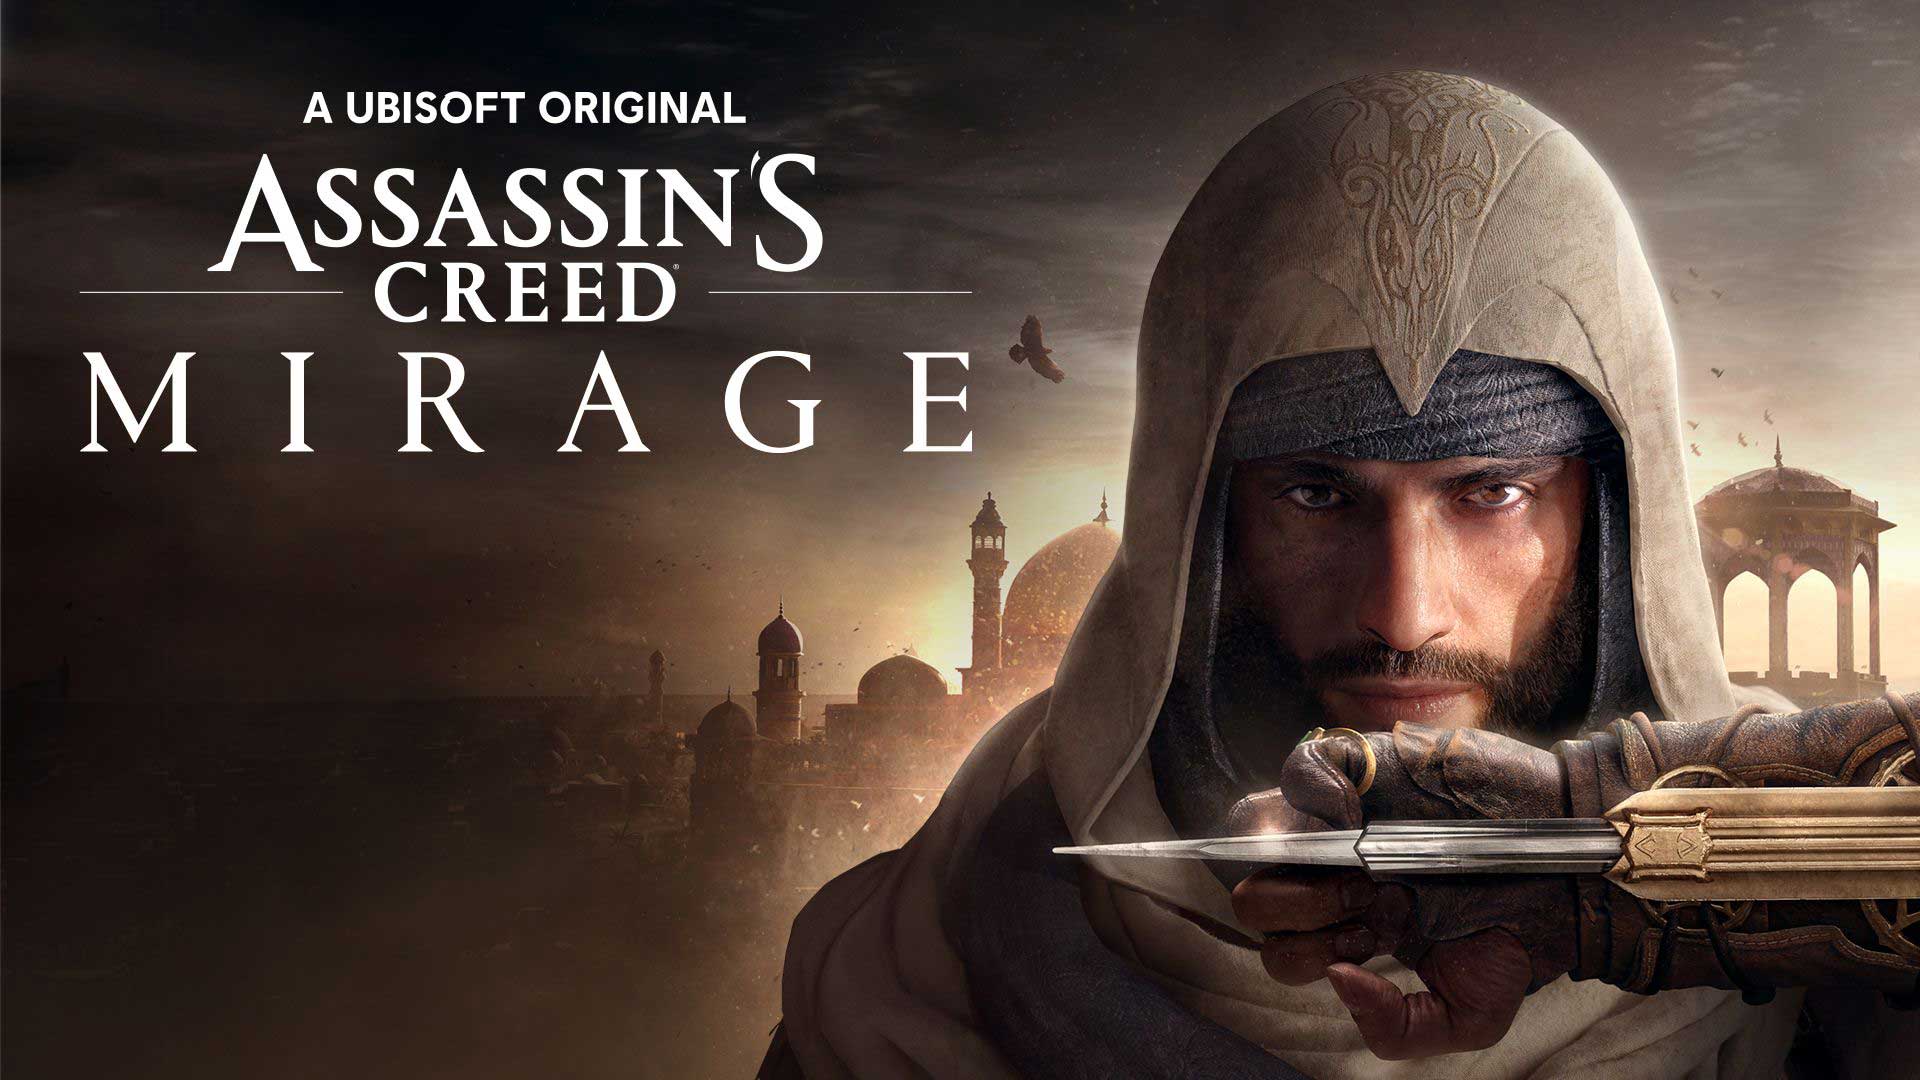 Assassin’s Creed Mirage, The Old Couldron, theoldcouldron.com